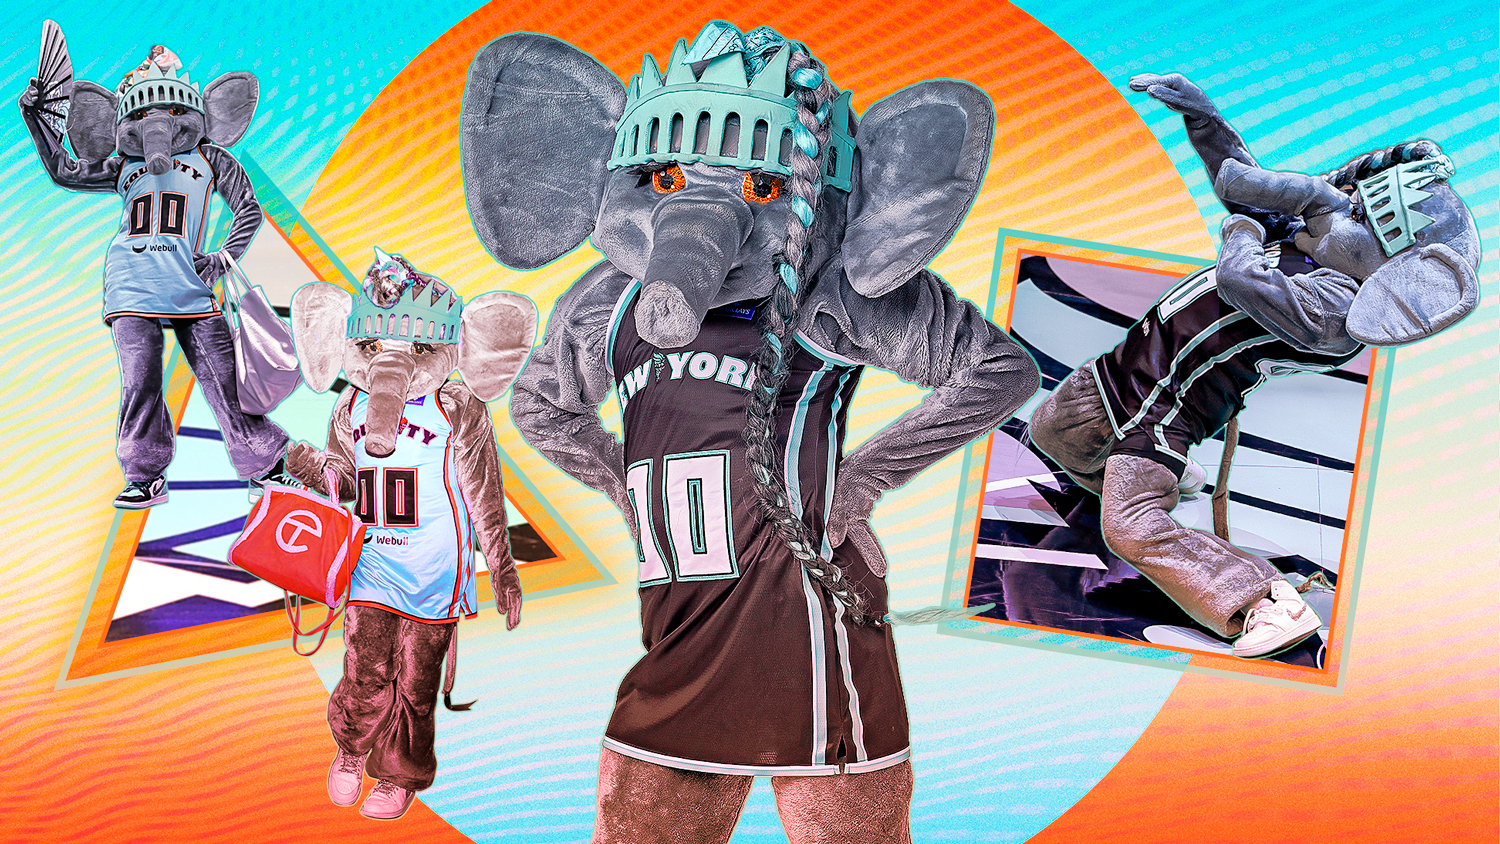 Ellie the Elephant steals the show at New York Liberty games